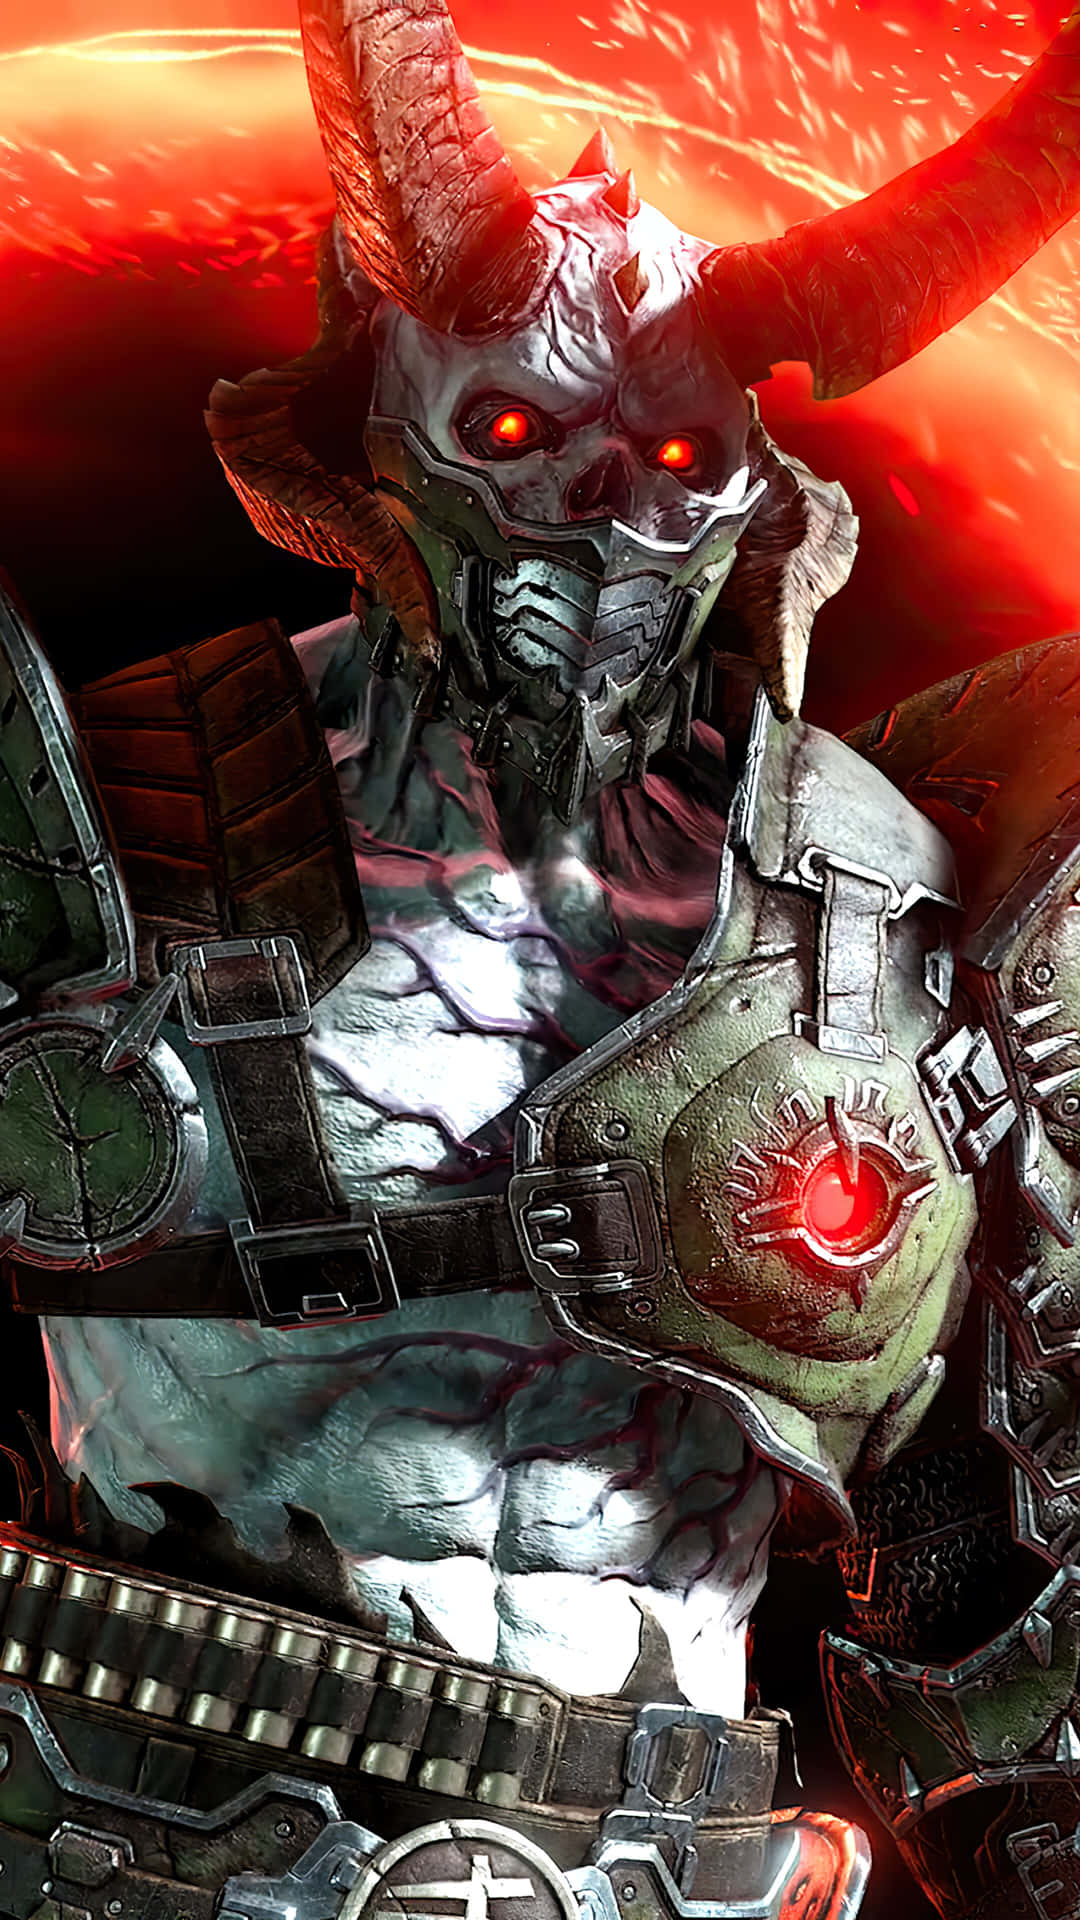 Become the Slayer and take on Hell's armies in the visually stunning DOOM Eternal, now available on iPhone. Wallpaper